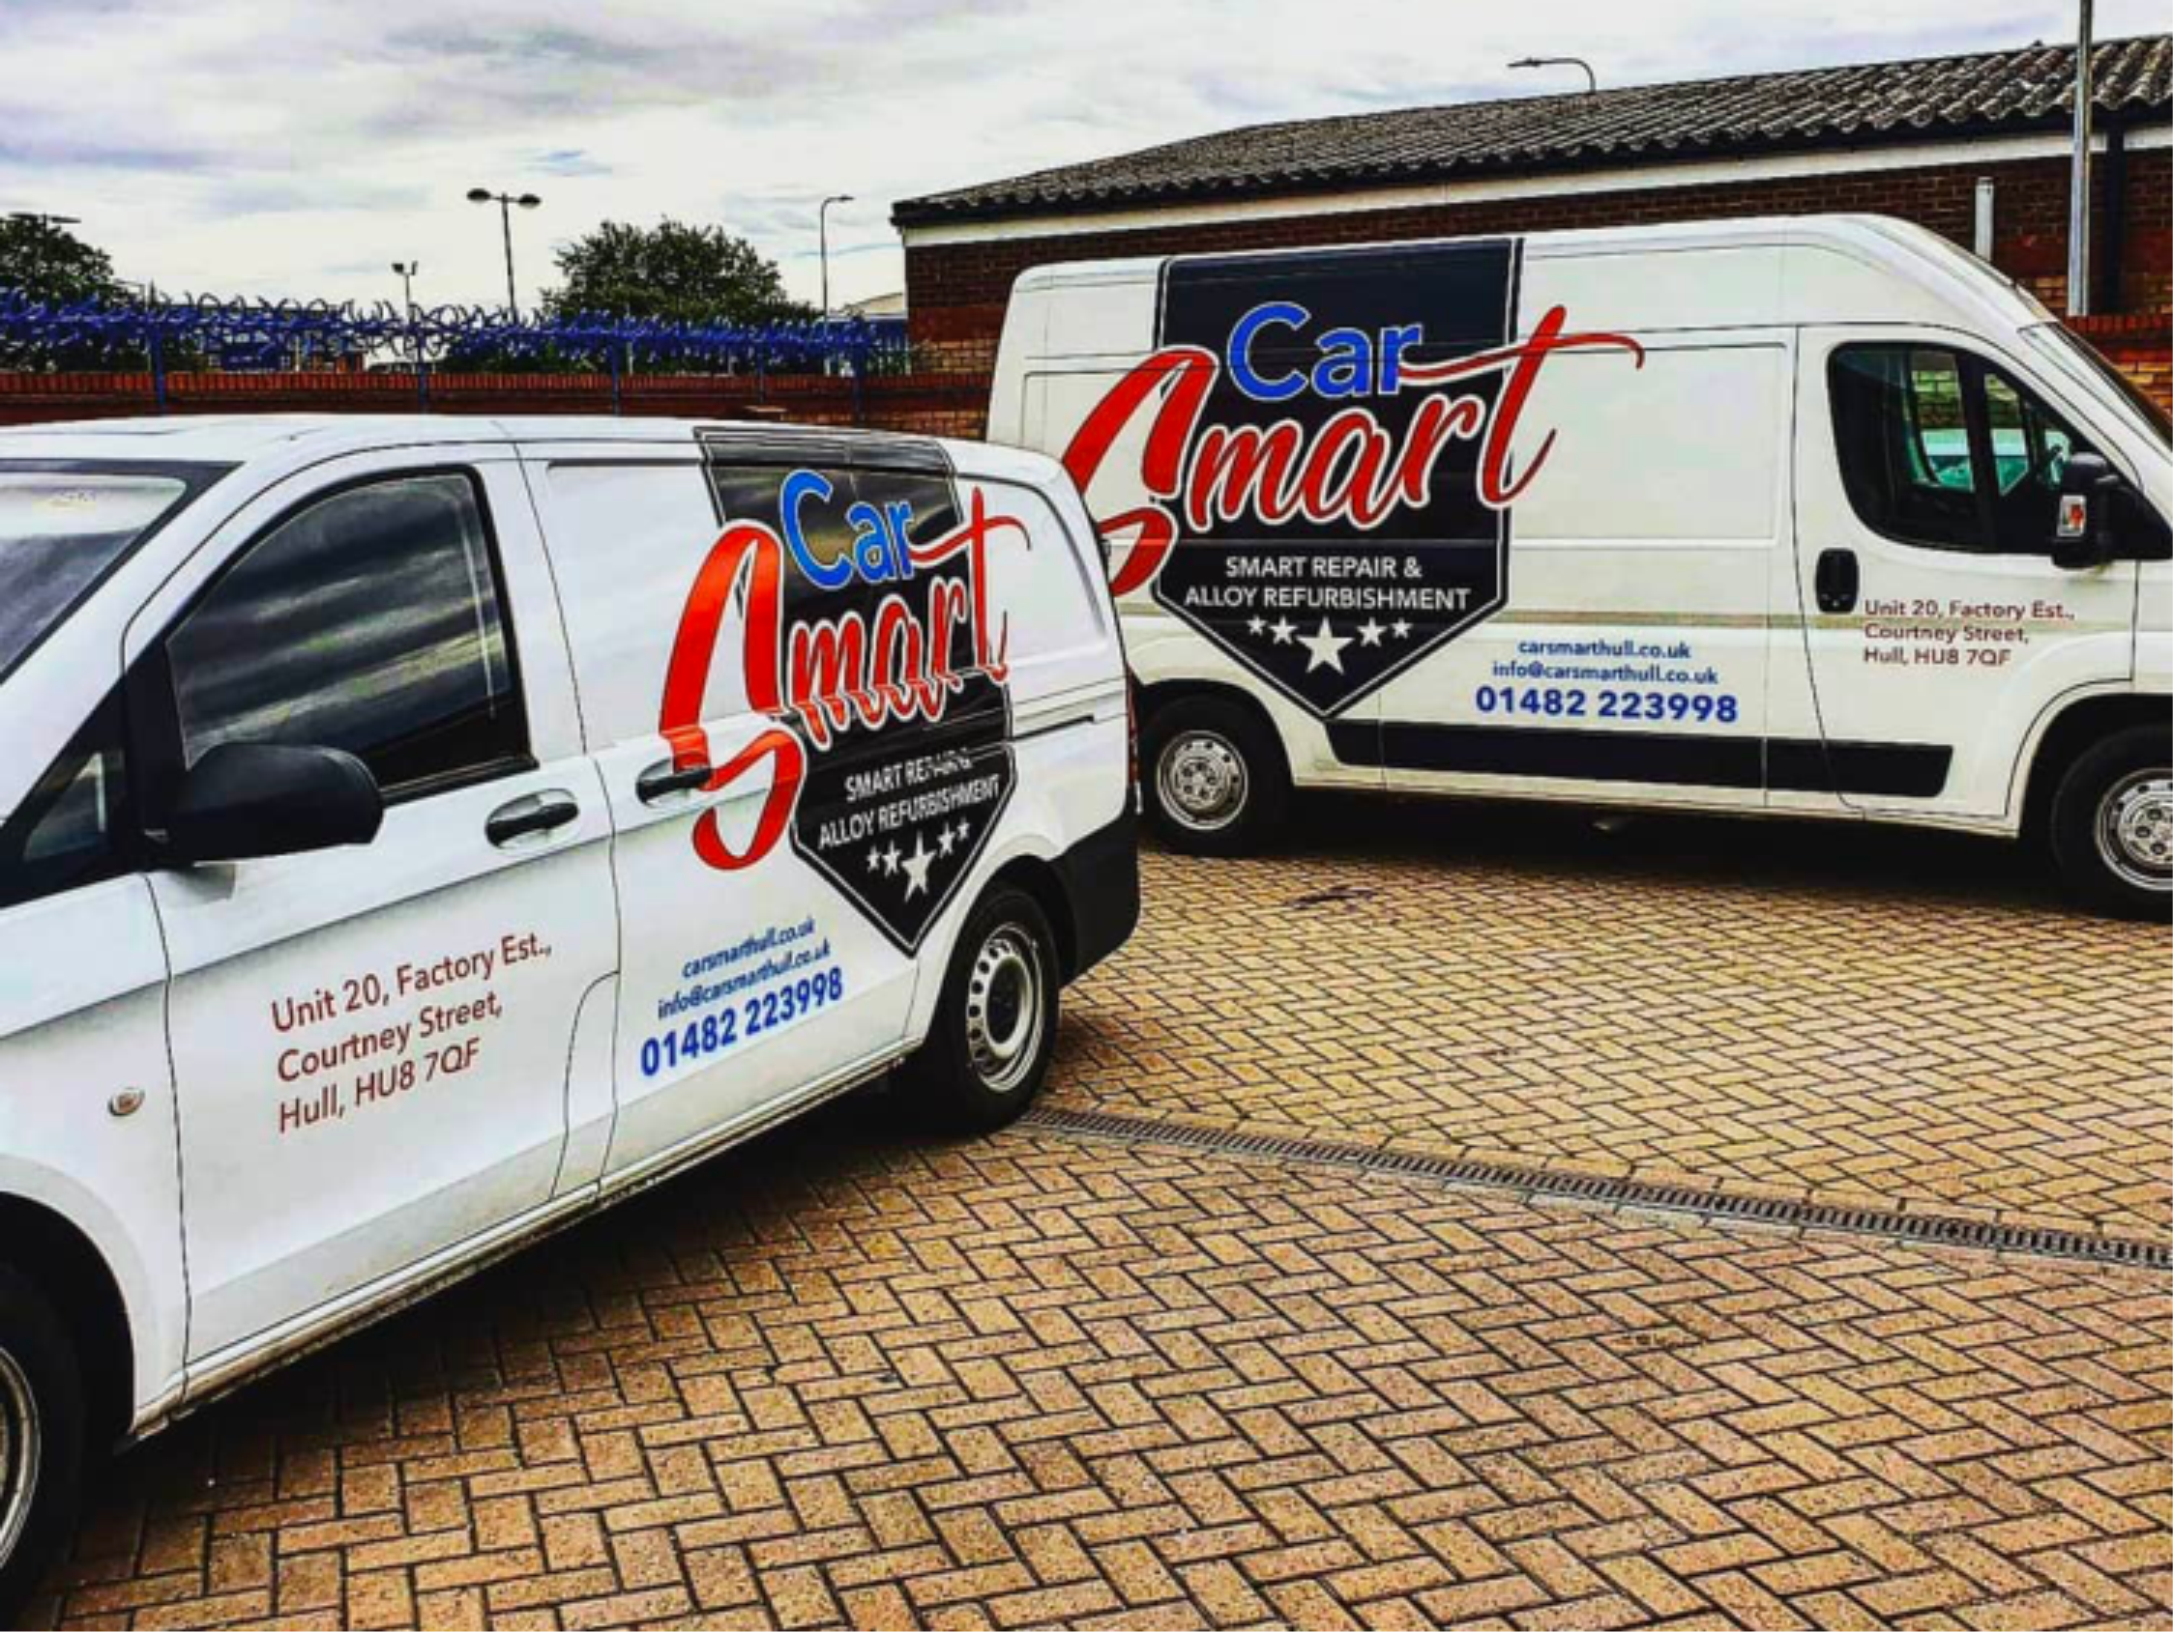 Car Smart Cut Graphics by Business 101 in Hull